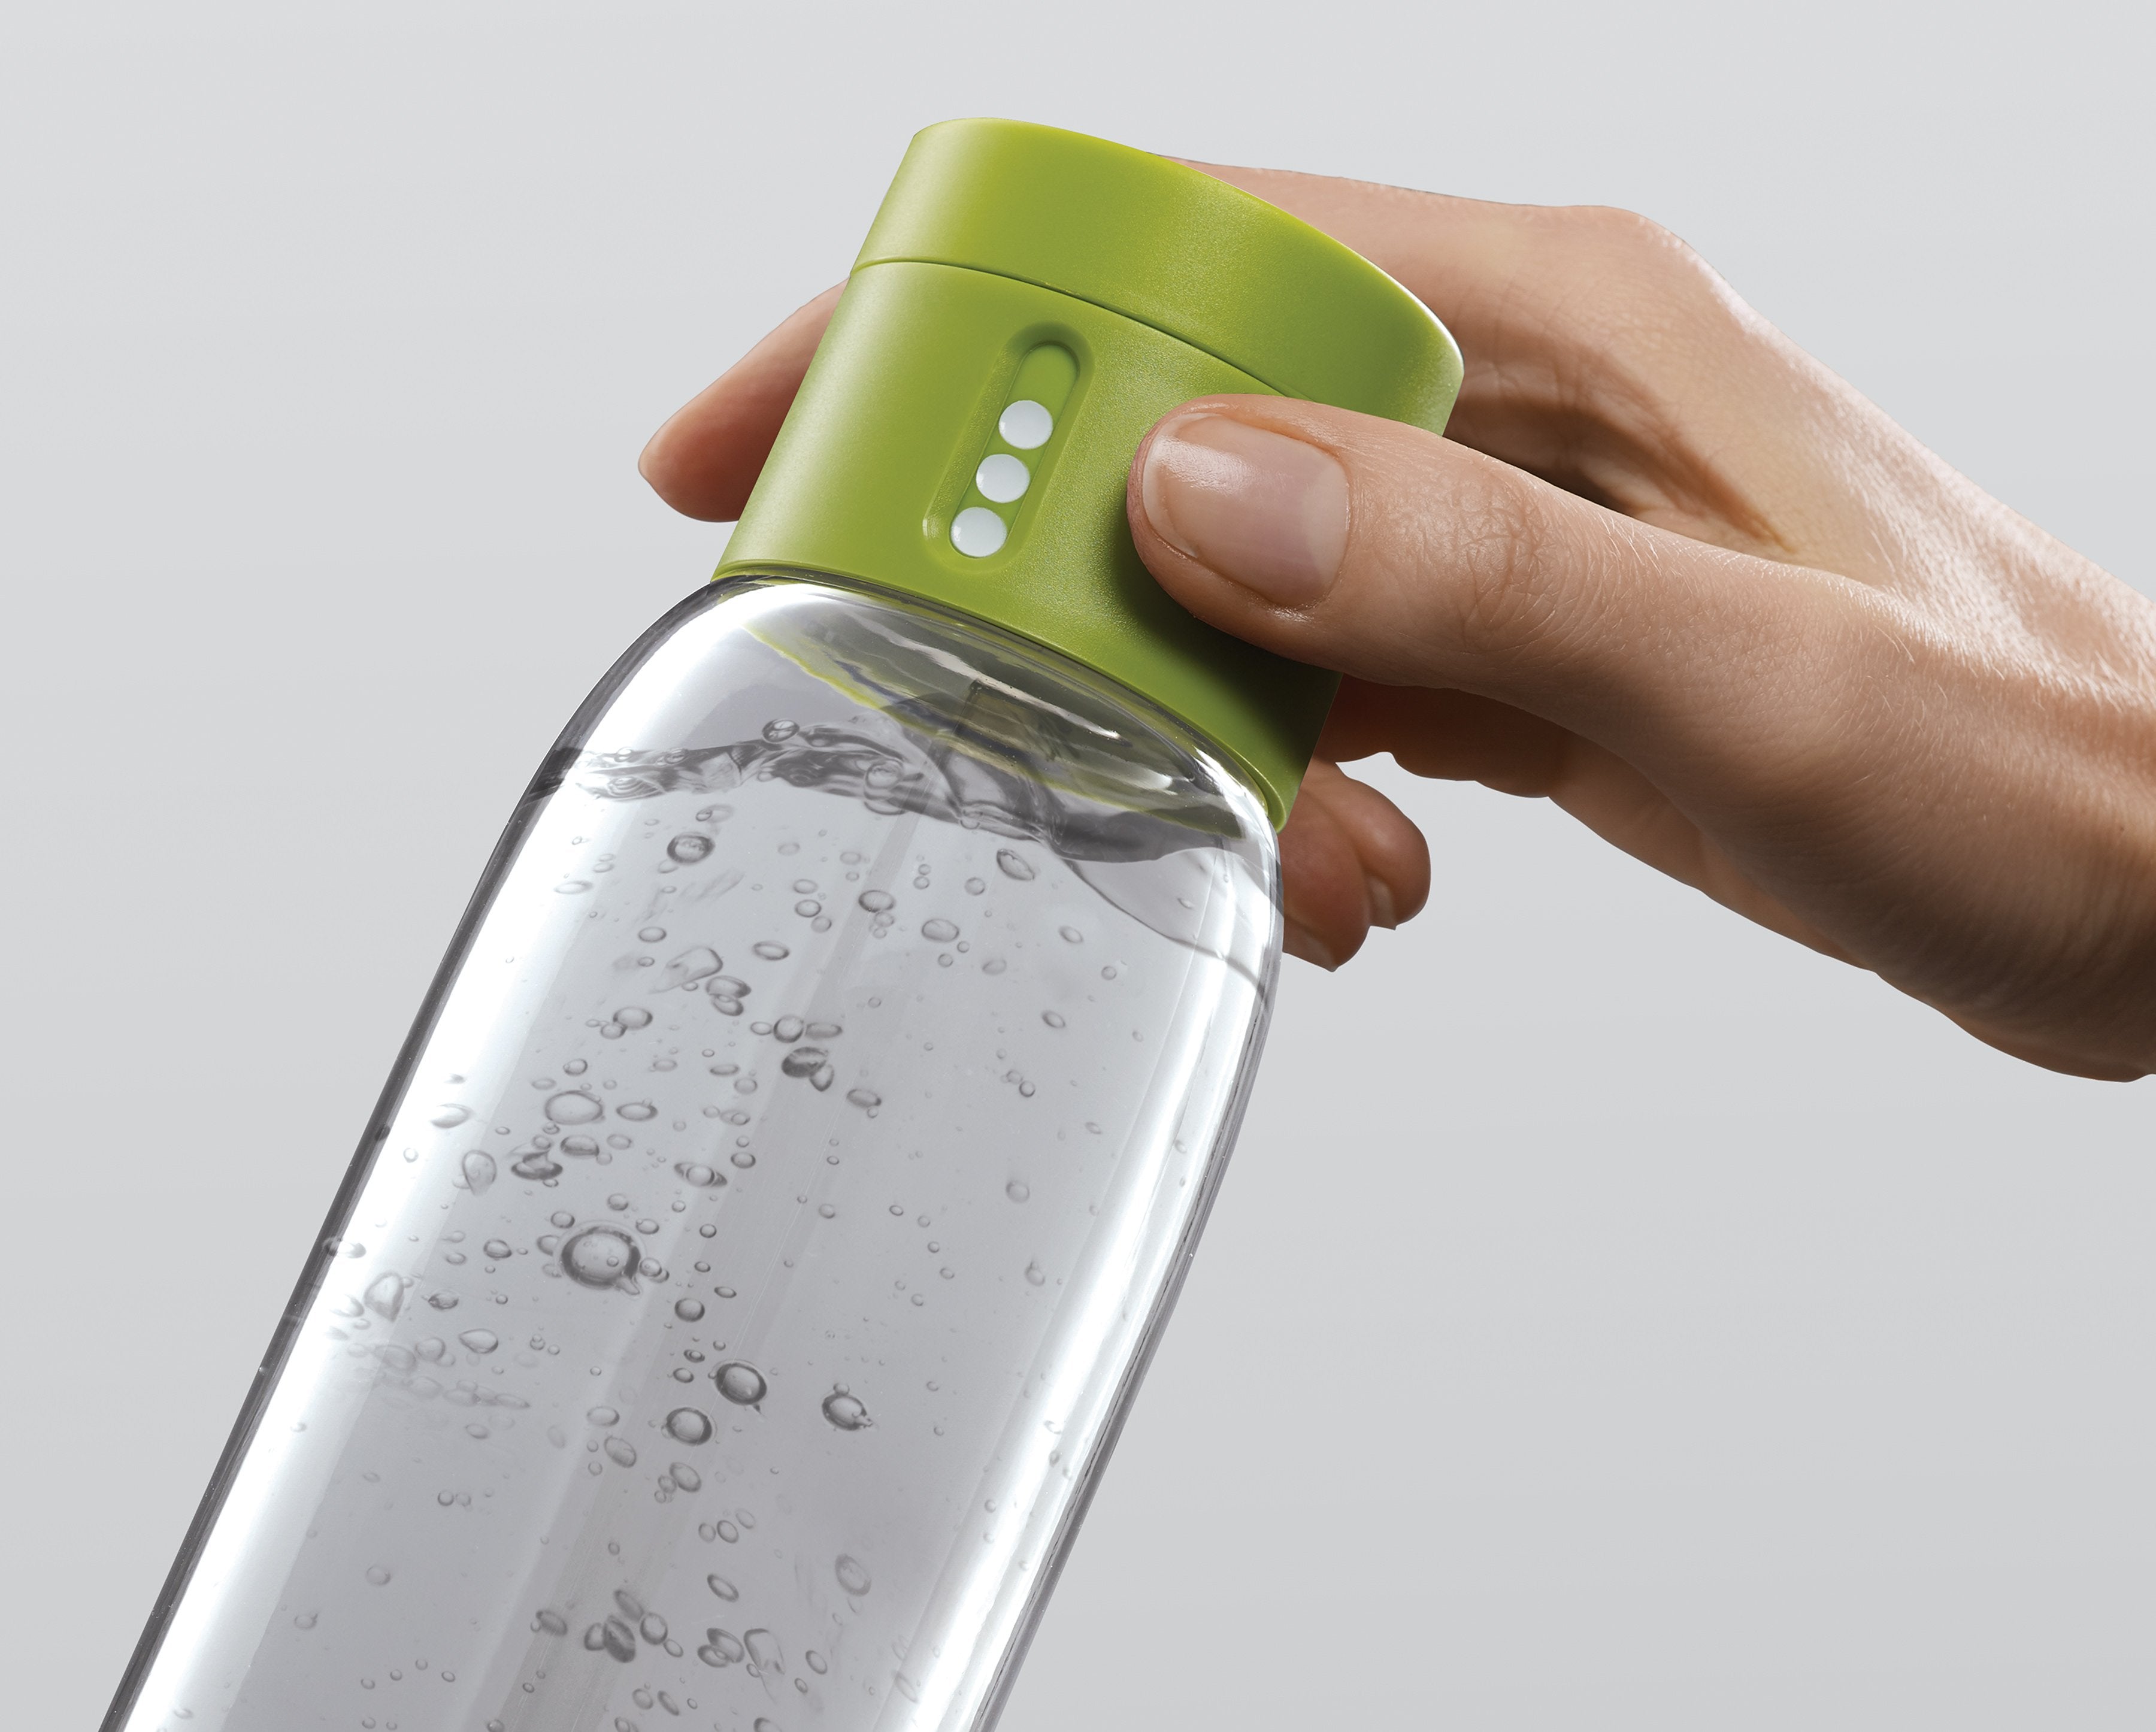 BEON.COM.AU  Track your daily hydration goals with this cleverly designed water bottle. The lid displays a new dot each time you refill so you can easily keep count of the number of bottles you drink.  Leakproof lid records number of bottles drunk New dot appears every time you refill and close lid Made from... Joseph Joseph at BEON.COM.AU